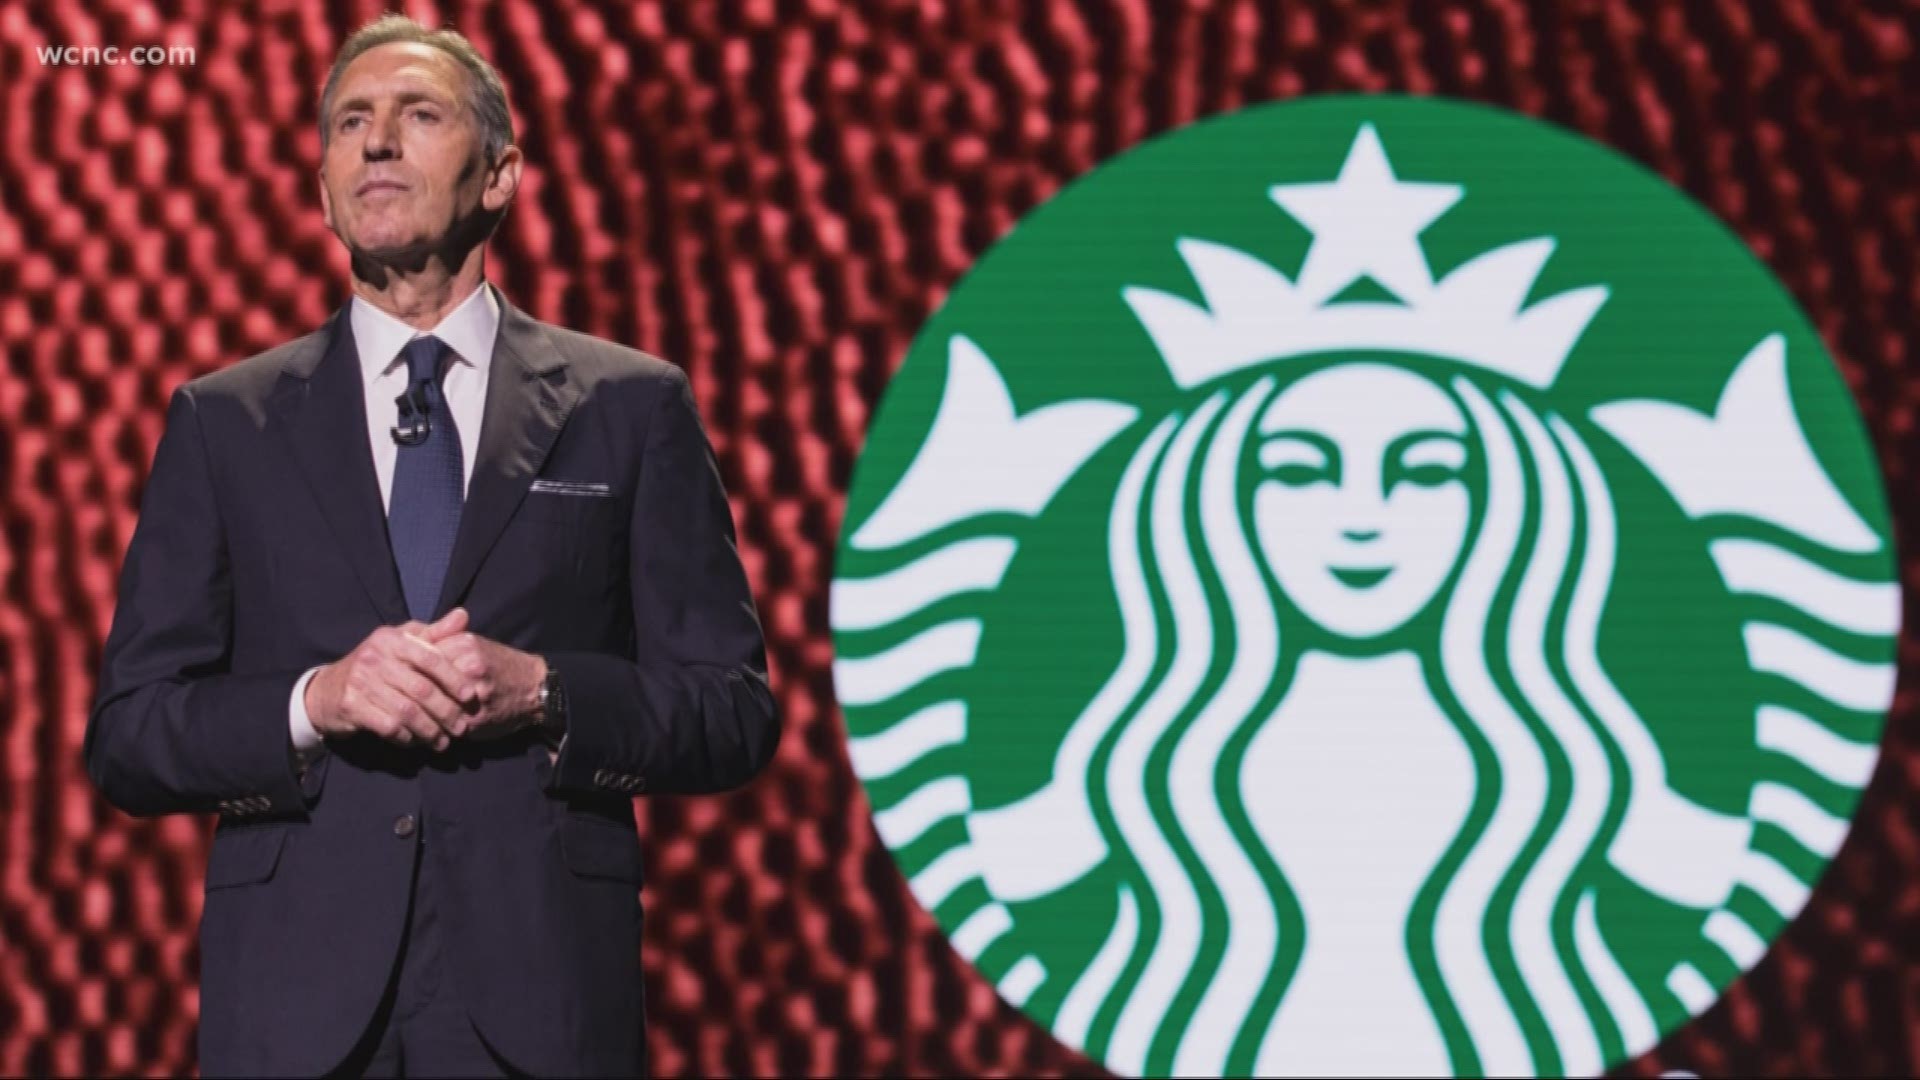 Former head of Starbucks Howard Schultz is putting together a public relations team that could help him run for president, according to a new report from CNBC.